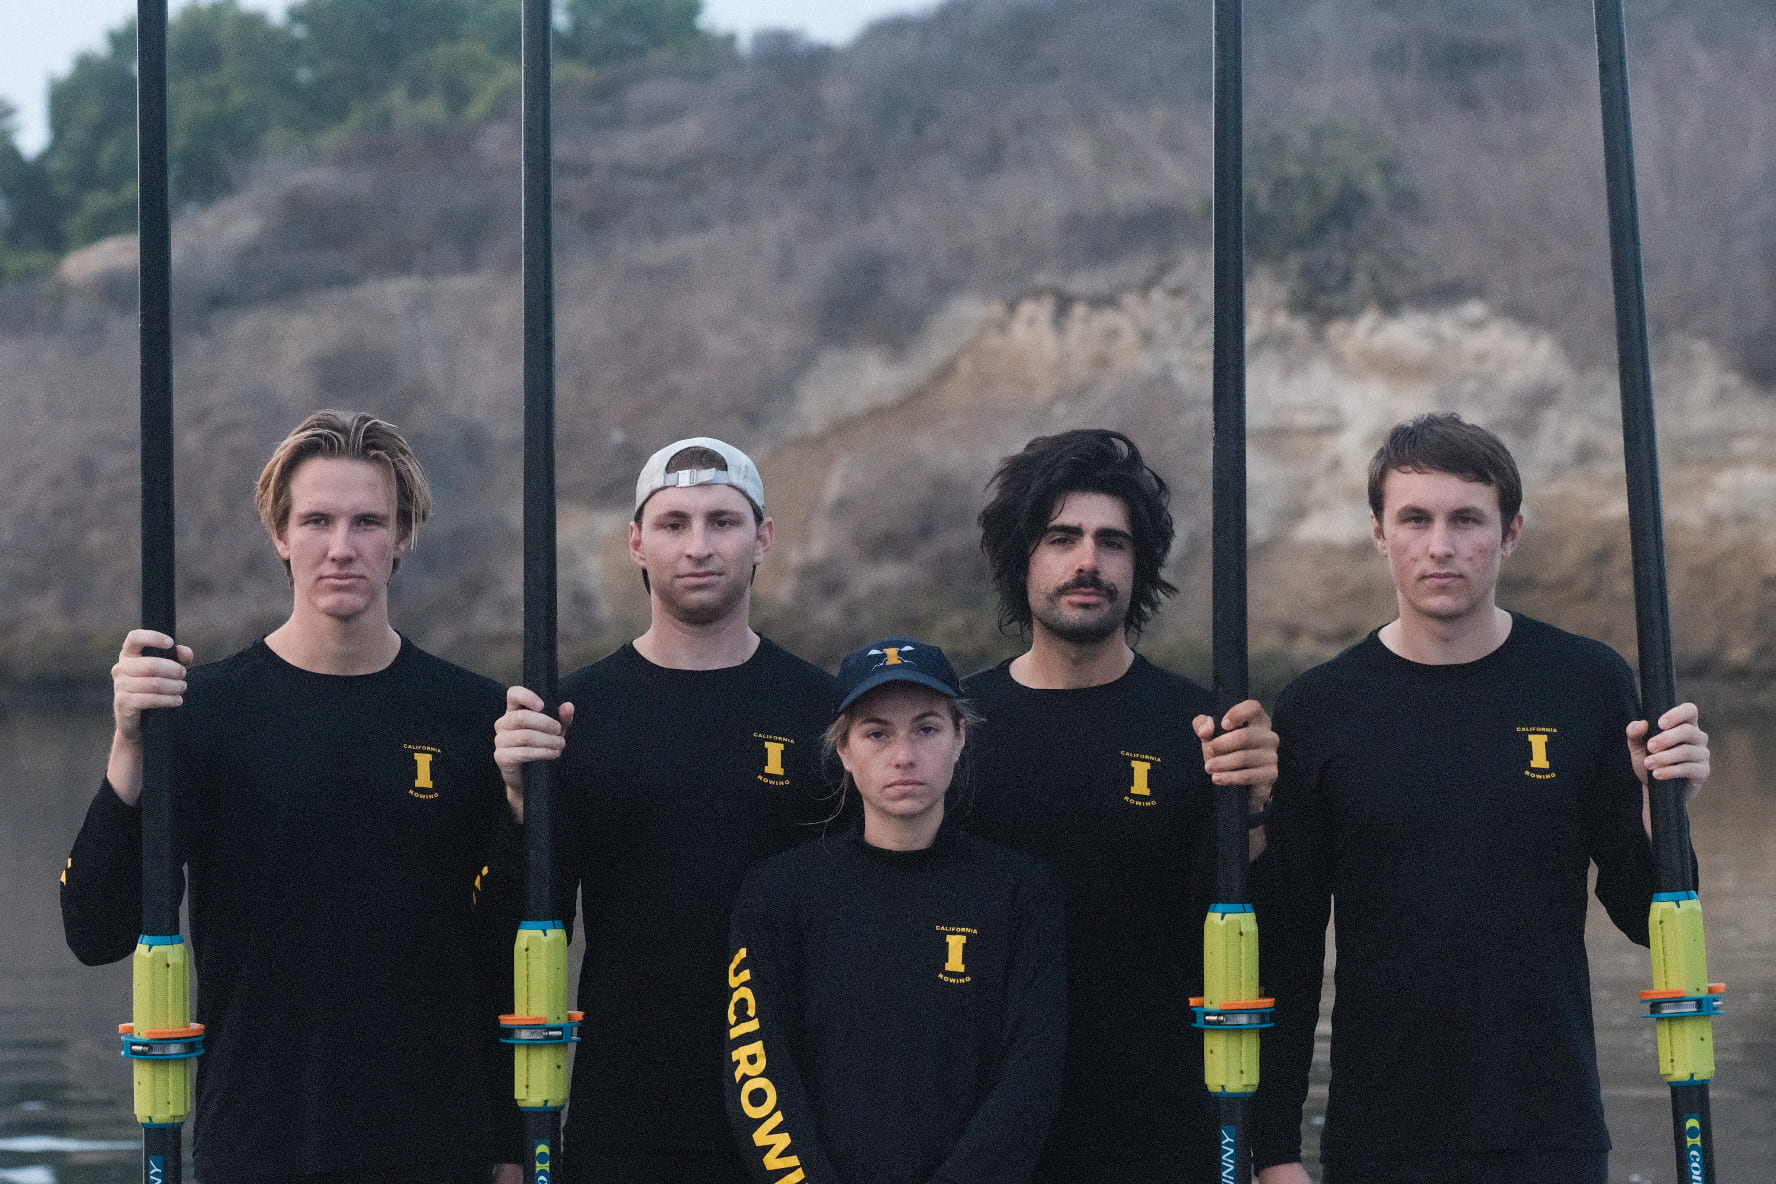 Five student athletes standing with rowing paddles